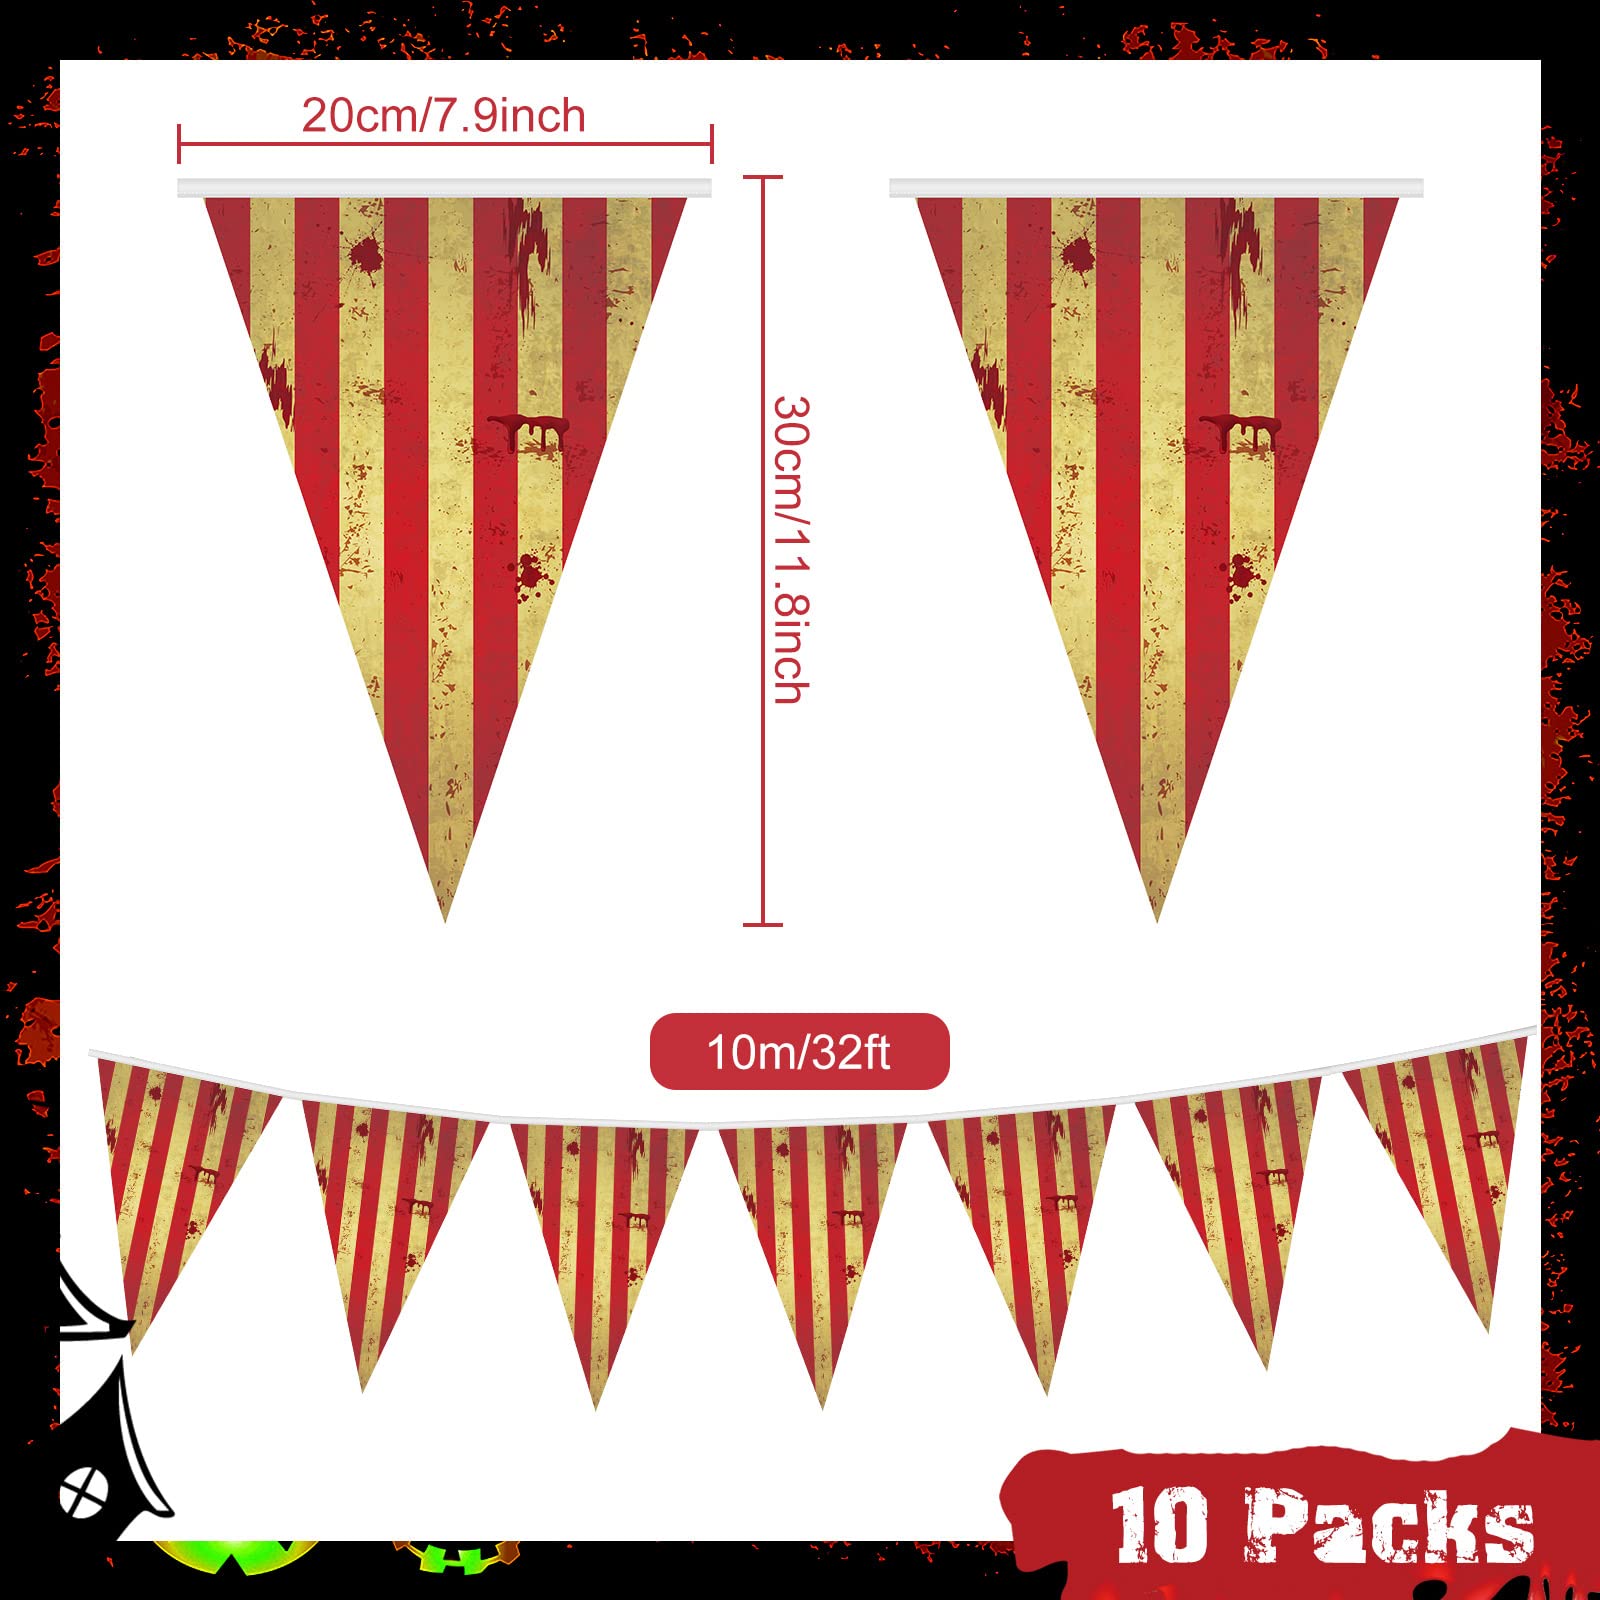 10 Packs Creepy Carnival Decorations Evil Halloween Striped Pennant Banner Triangle Bunting Flags Circus Theme Party Decorations Evil Carnival Decorations for Carnival Halloween Party Decorations